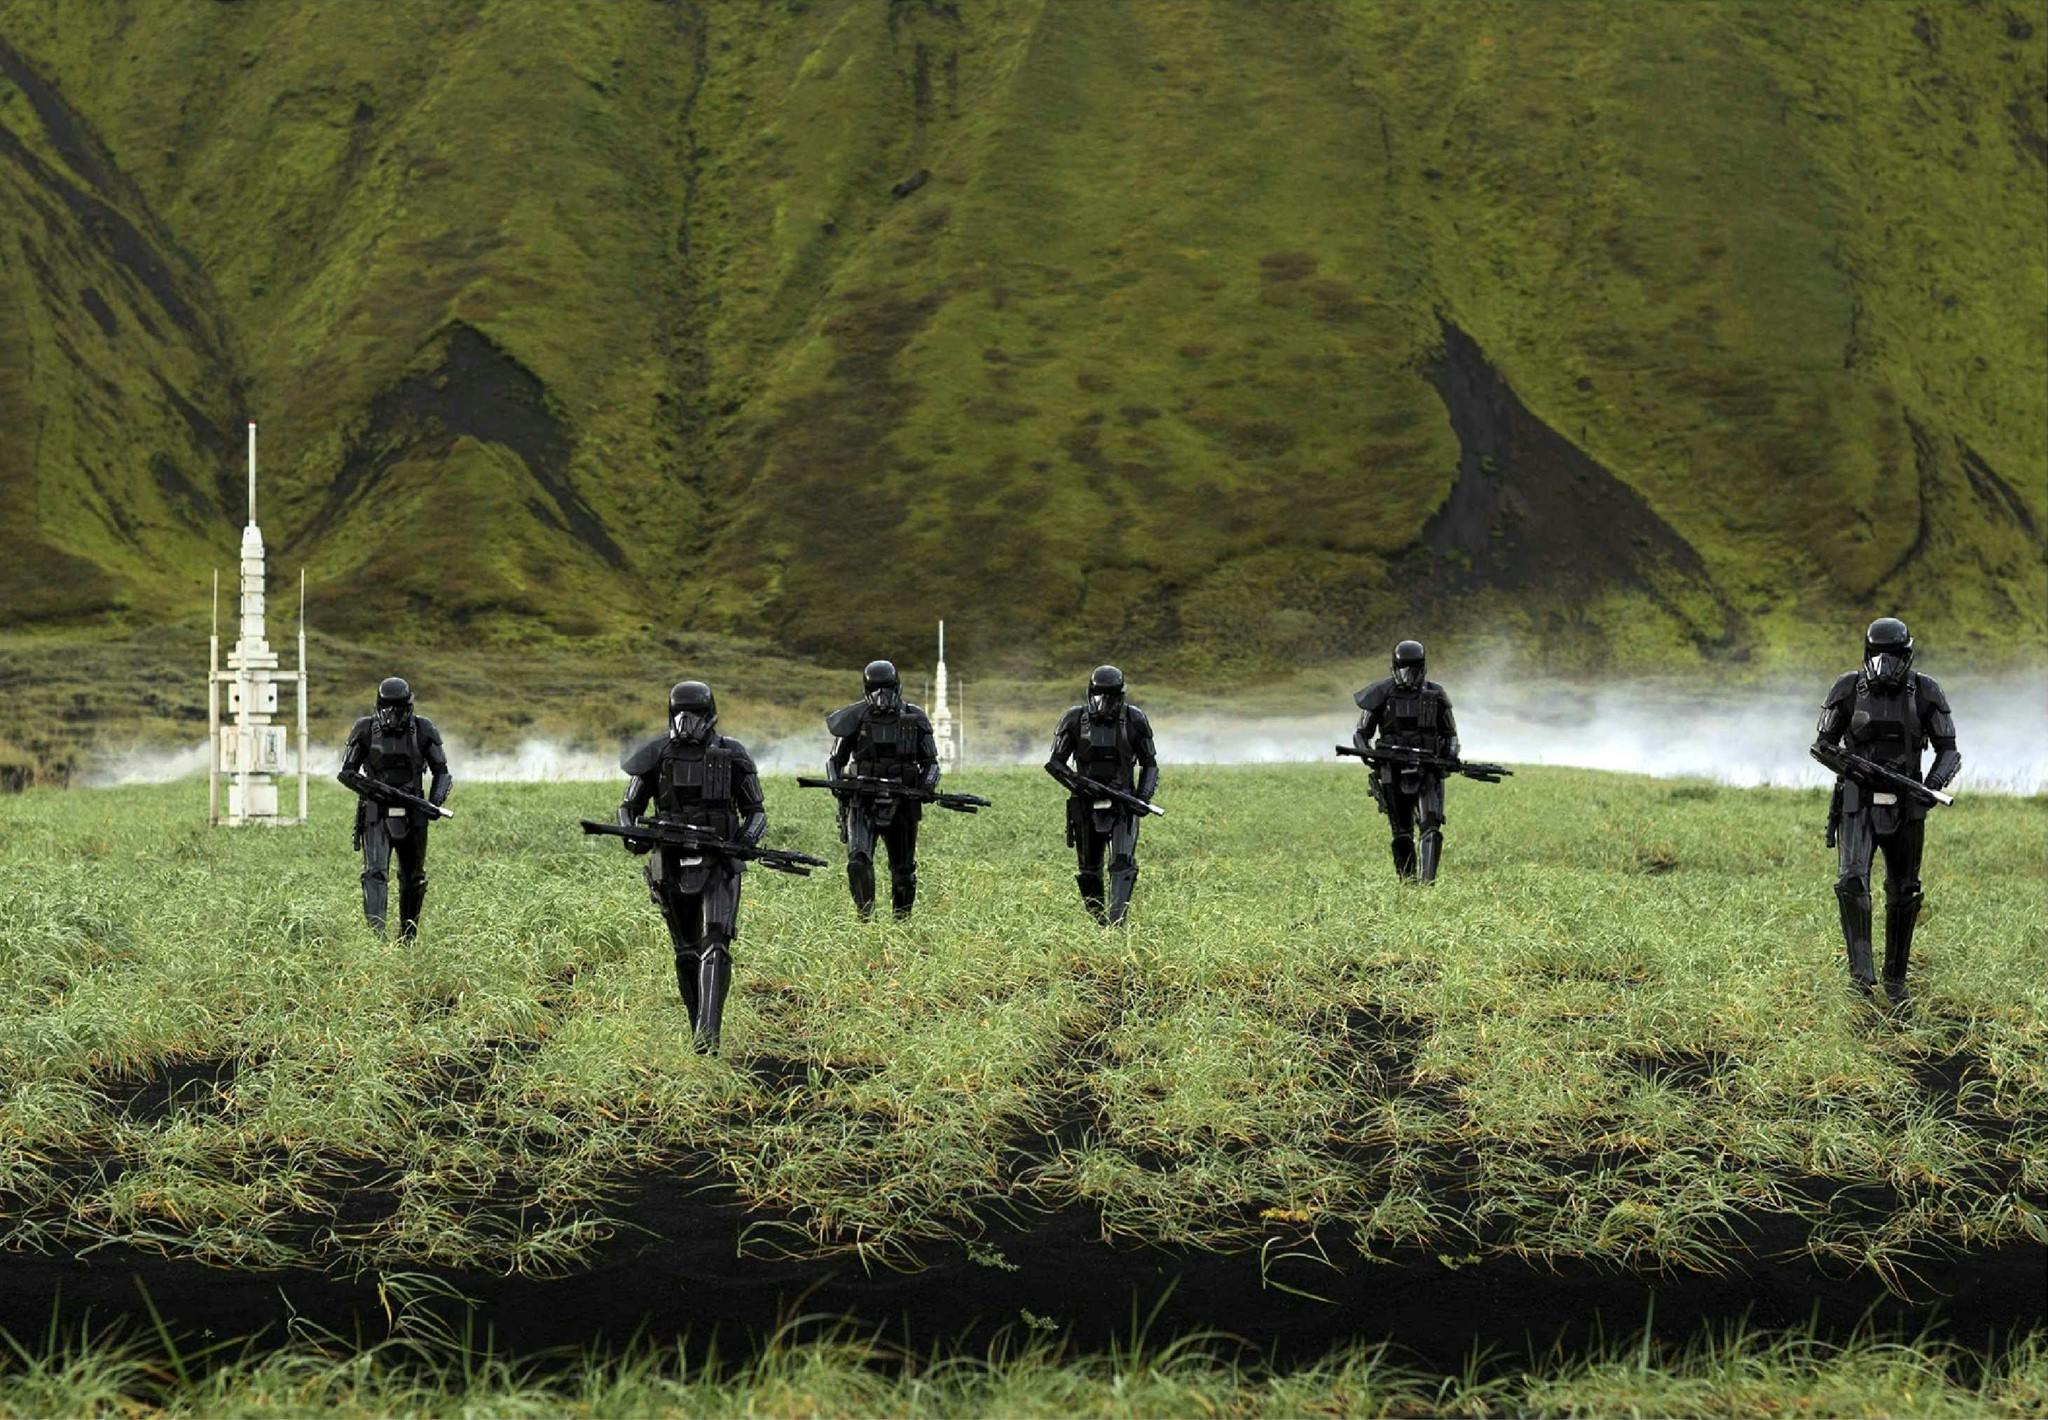 A scene from Rogue One: A Star Wars Story filmed in Iceland